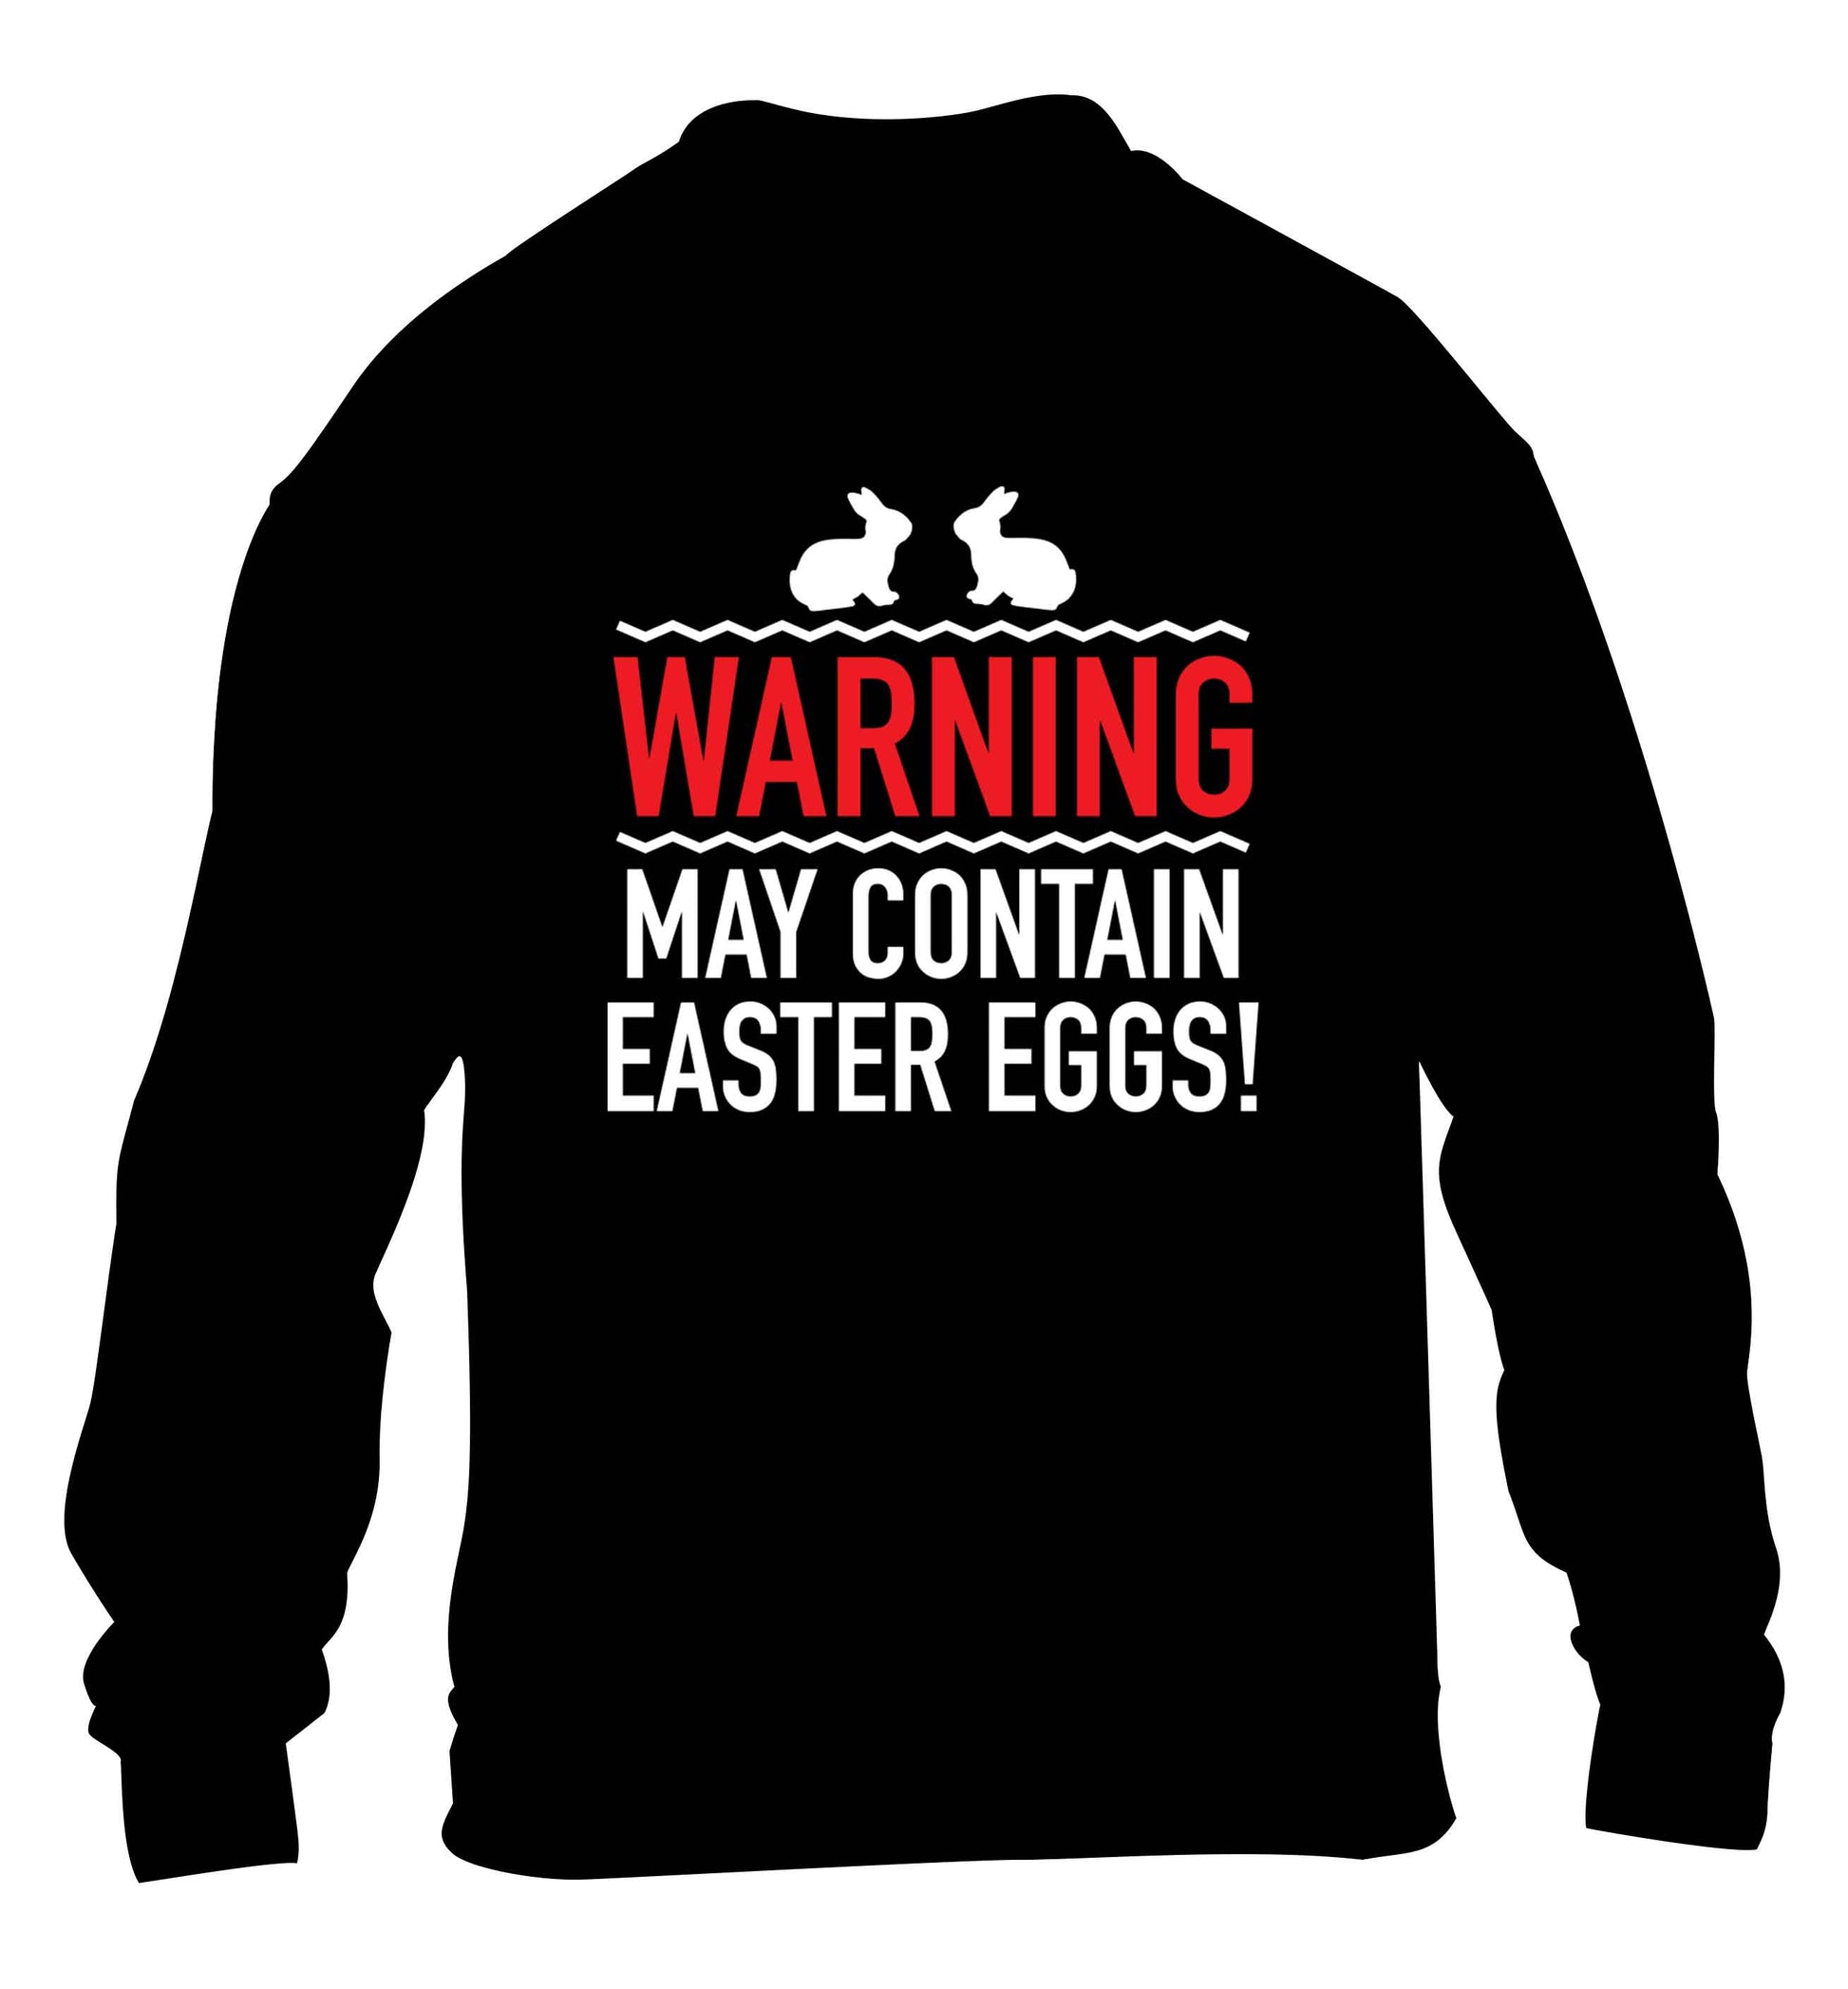 Warning may contain Easter eggs children's black sweater 12-13 Years